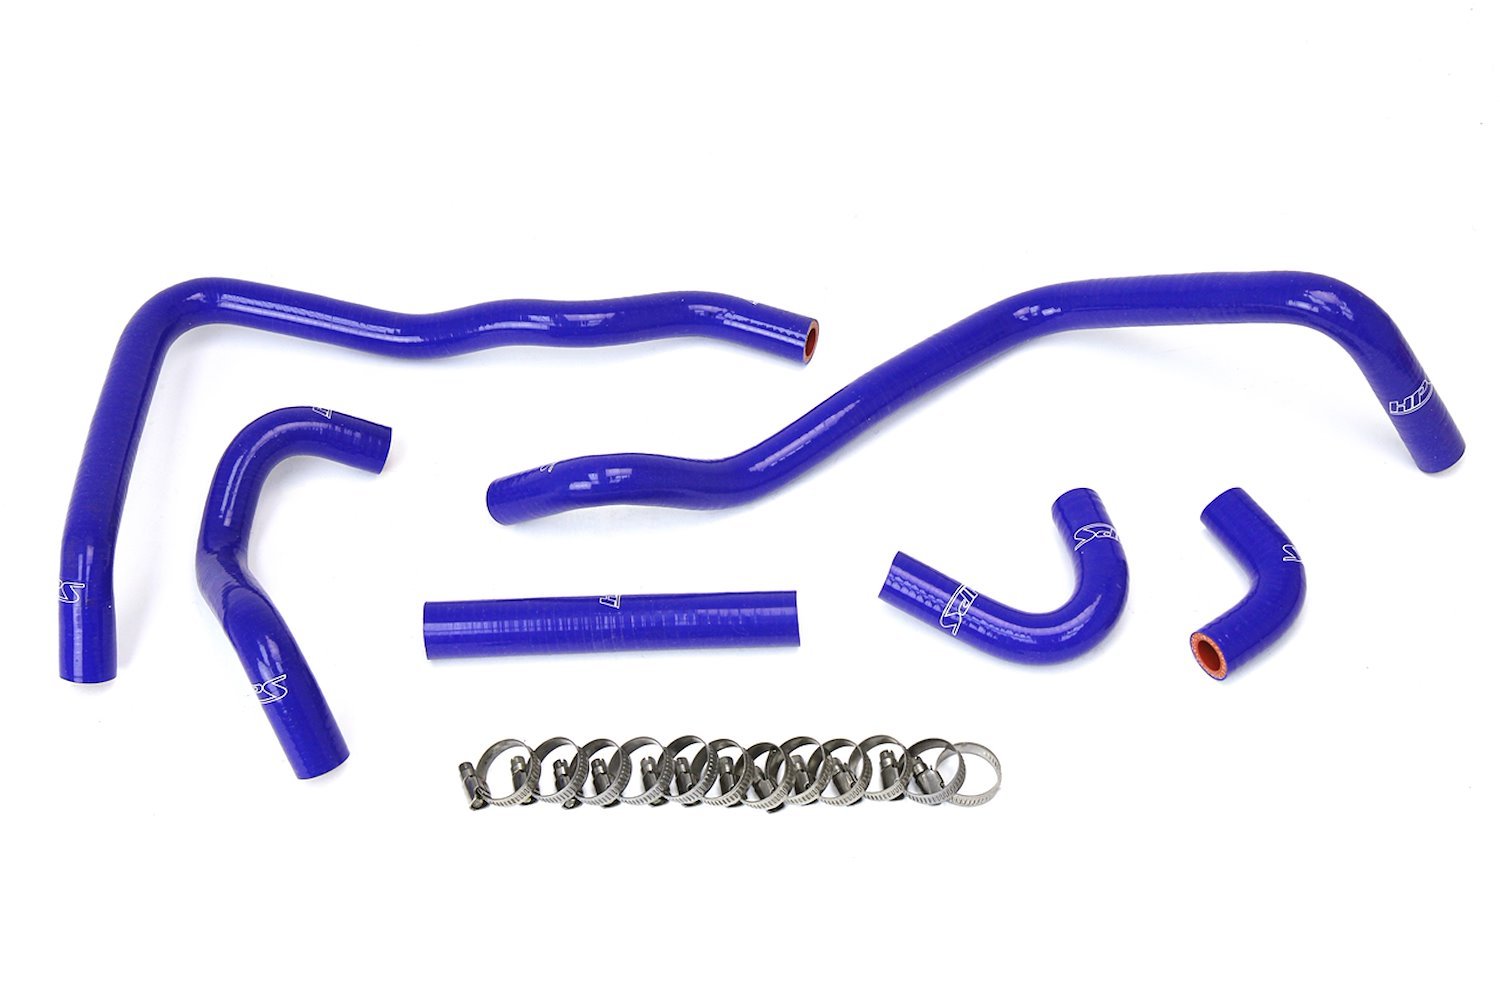 57-1433-BLUE Heater Hose Kit, High-Temp 3-Ply Reinforced Silicone, Replace OEM Rubber Heater Coolant Hoses